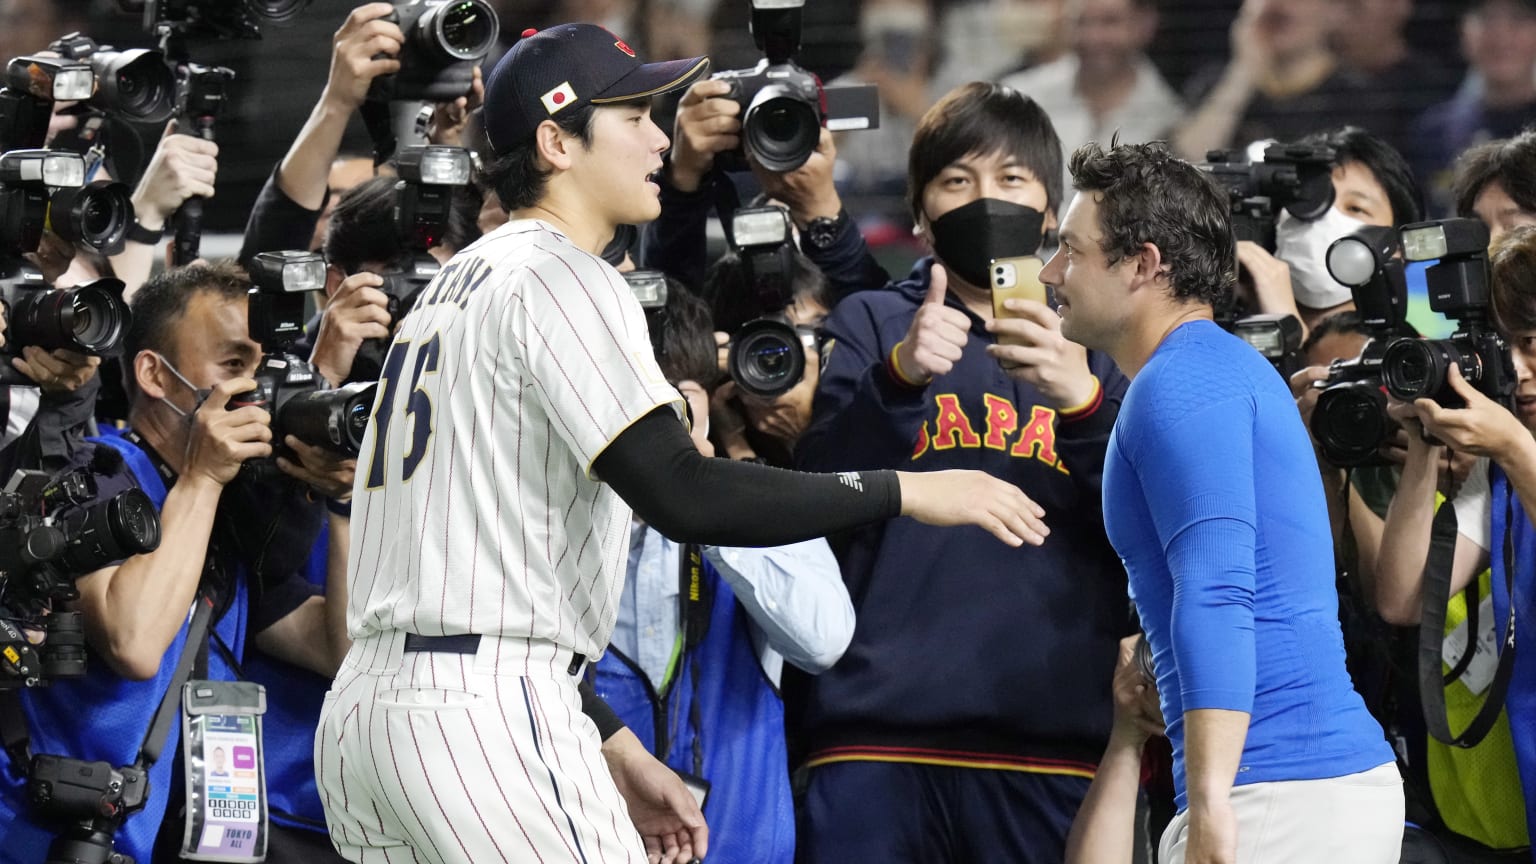 Two players, one in a white uniform, one in a blue shirt, greet each other in front of a crowd of photographers